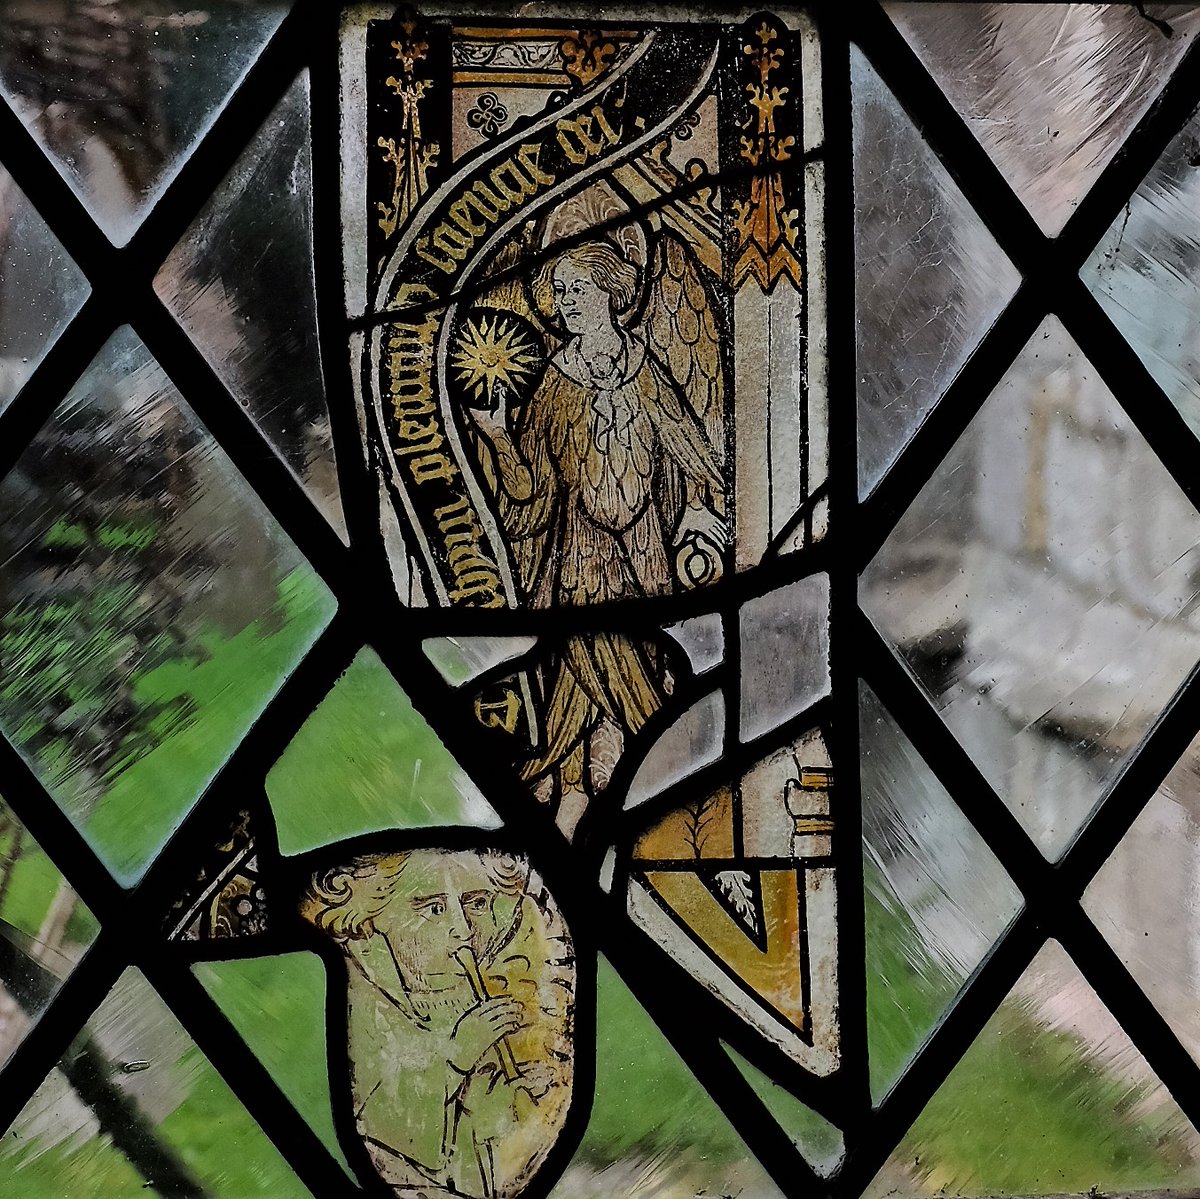 Cartmel Priory #Cumbria visited in 2021. Beautiful reset fragments of medieval stained glass in the porch. #StainedGlassSunday